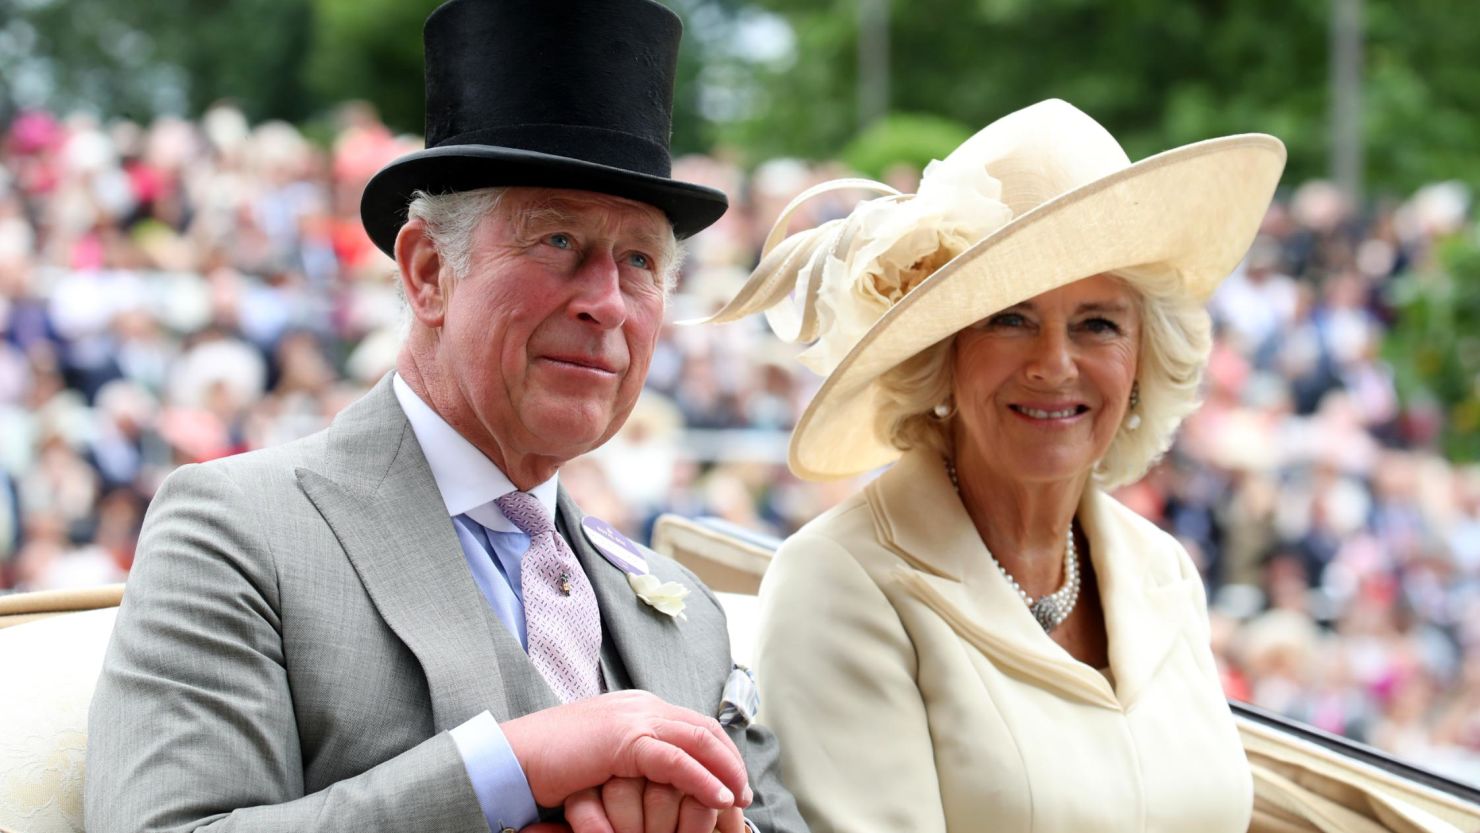 Prince Charles, Prince of Wales, and Camilla, Duchess of Cornwall, arriving at Royal Ascot in June. The couple visited Cork the same month.